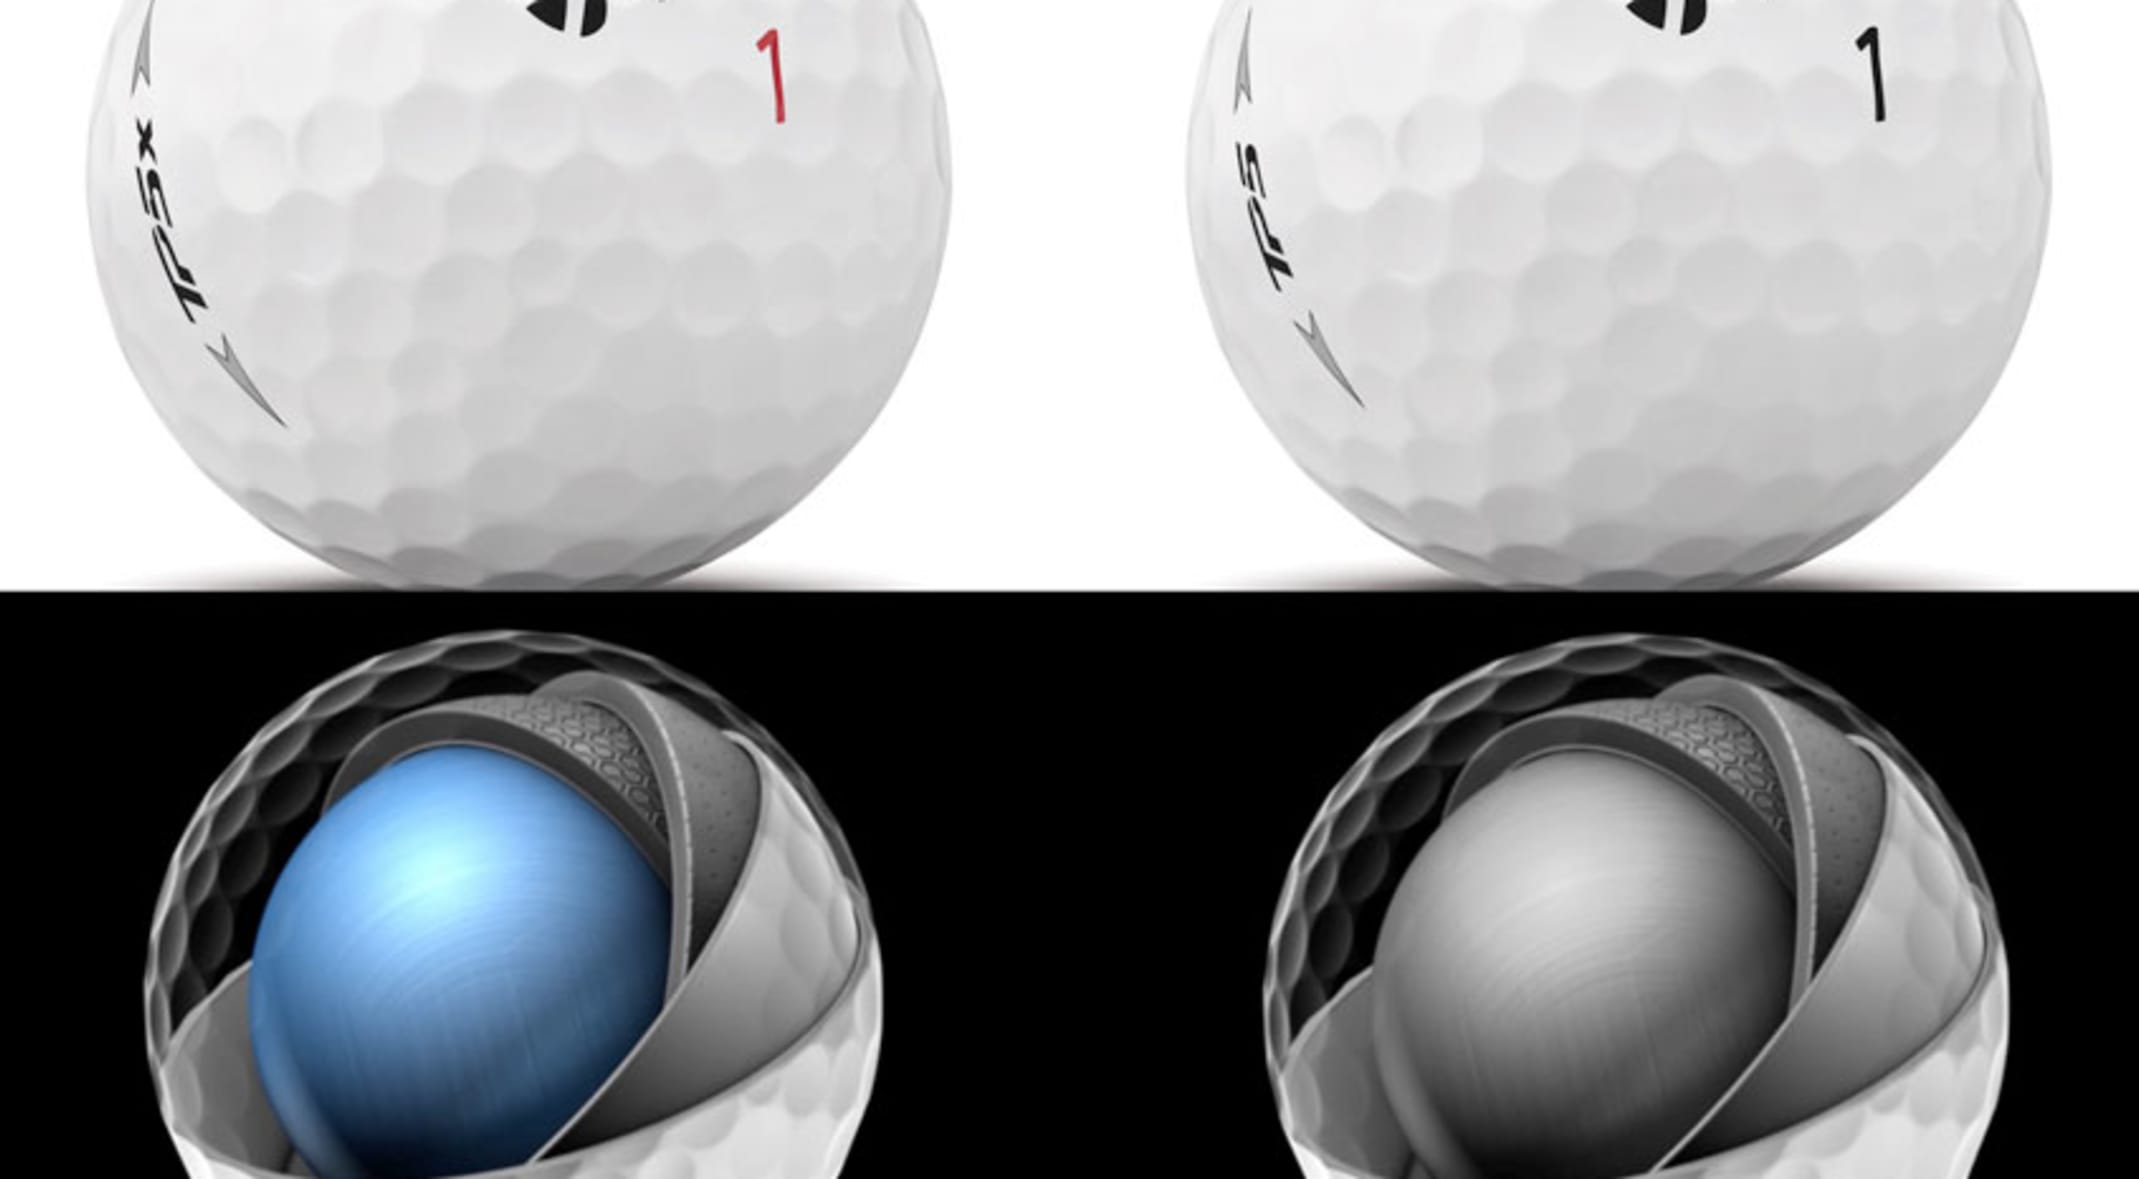 TaylorMade announces new 2019 TP5 and TP5x golf balls